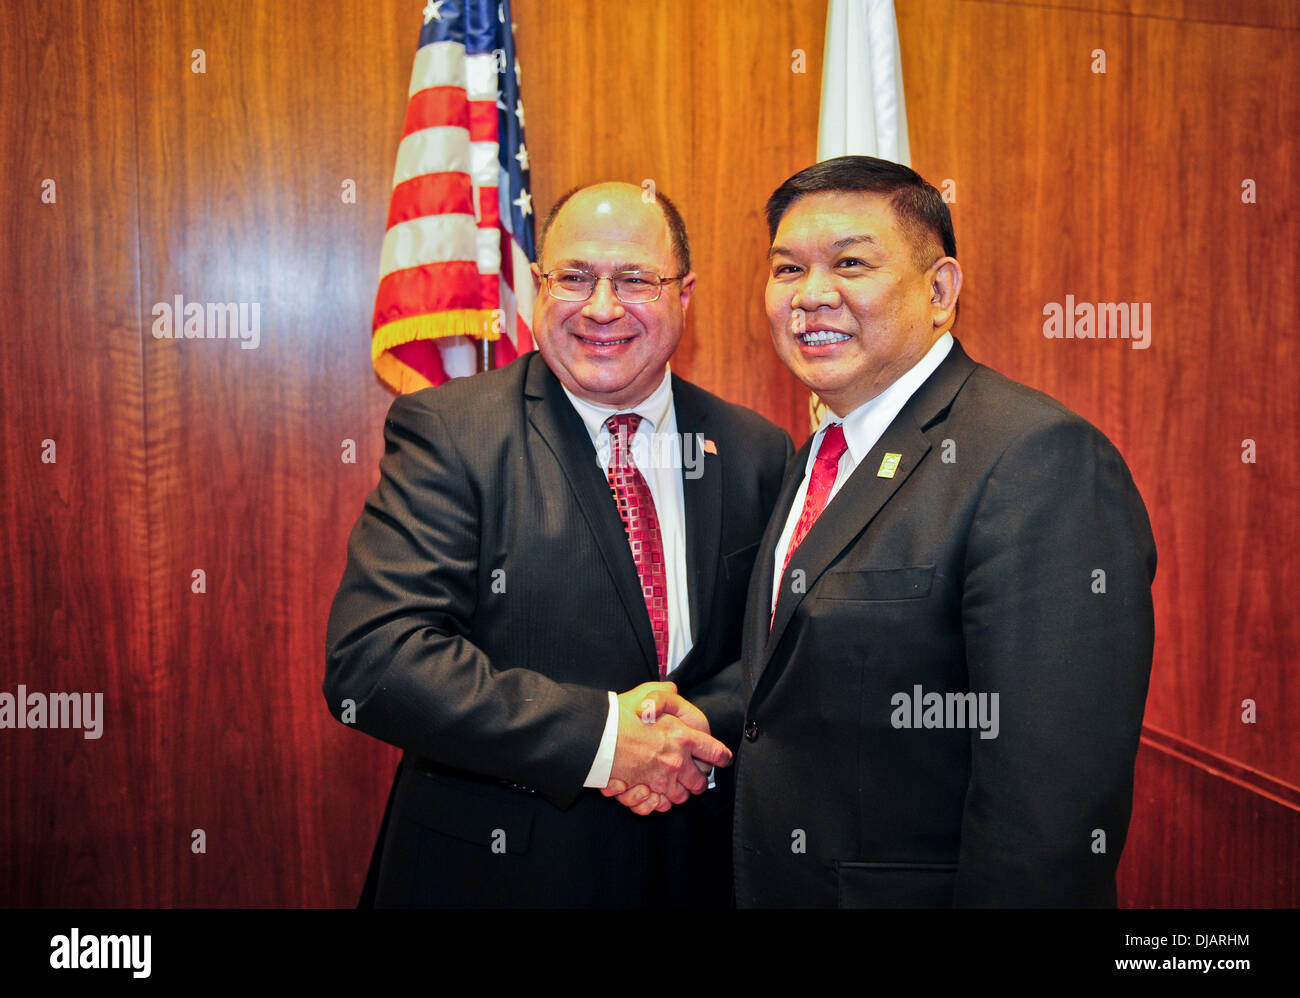 Alhambra, California. 25th Nov, 2013. Stephen K. Sham, the newly elected mayor of Alhambra, California, shakes hands with former mayor Steven T. Placido at a handover ceremony in Alhambra, California, Nov. 25, 2013. Sham, a descendant from Chaoshan, China, became the first Asian American mayor of Alhambra in 2006 since Alhambra was founded in 1903. Credit:  Zhang Chaoqun/Xinhua/Alamy Live News Stock Photo